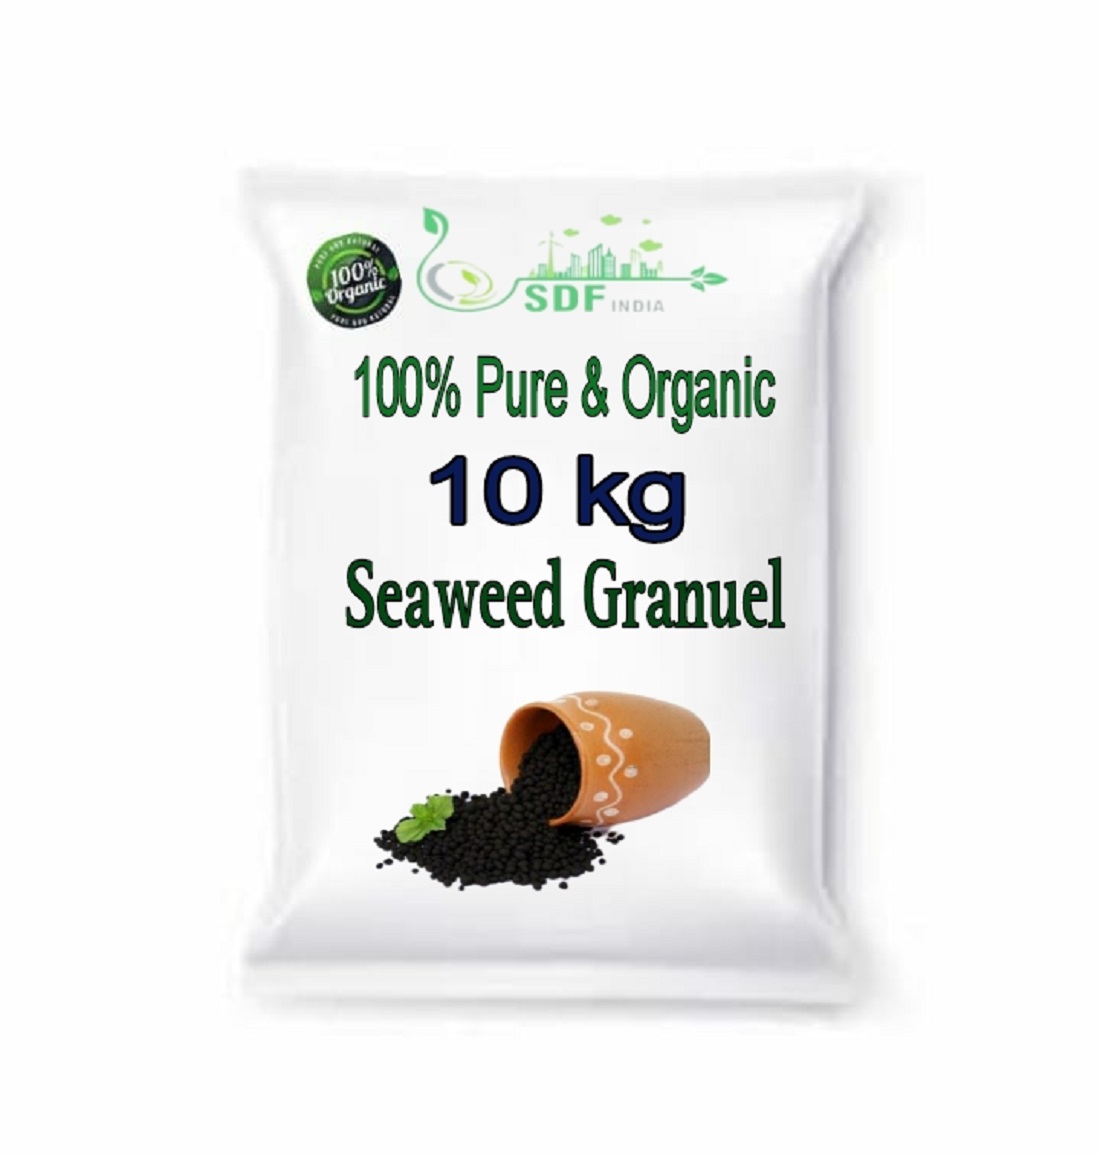 7010 SDFINDIA Seaweed Granules Organic Fertilizer, Plant Growth Promoter & Bio-Stimulant, Suitable for All Types of Plants 10kg( 7010_Seaweed_G_10kg)